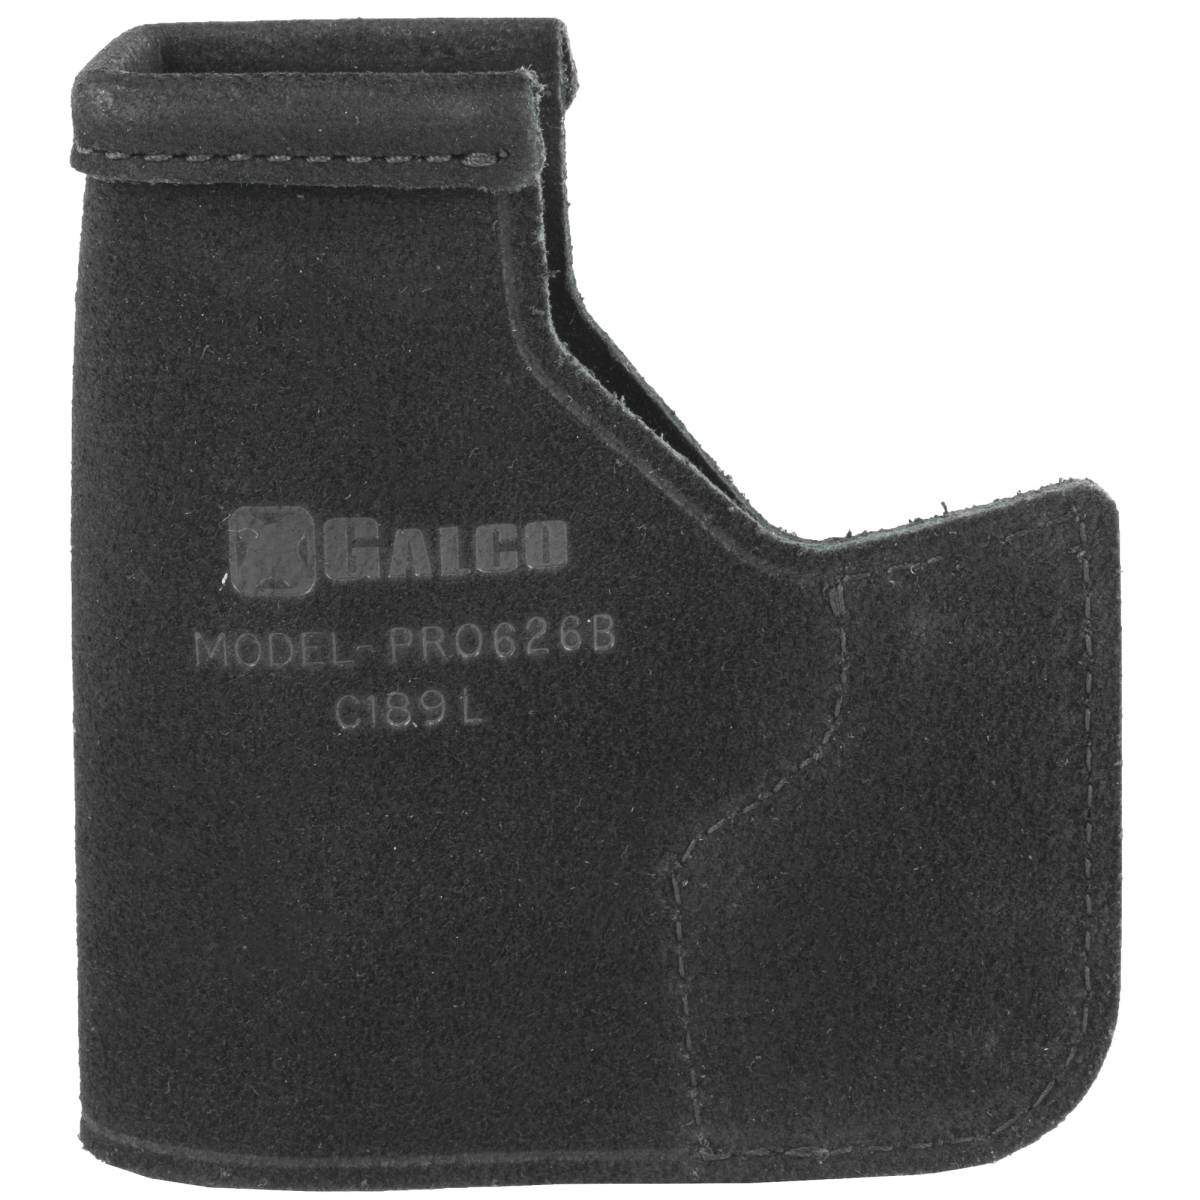 Galco PRO626B Pocket Protector Black Leather Fits S&W Bodyguard/Charter...-img-1